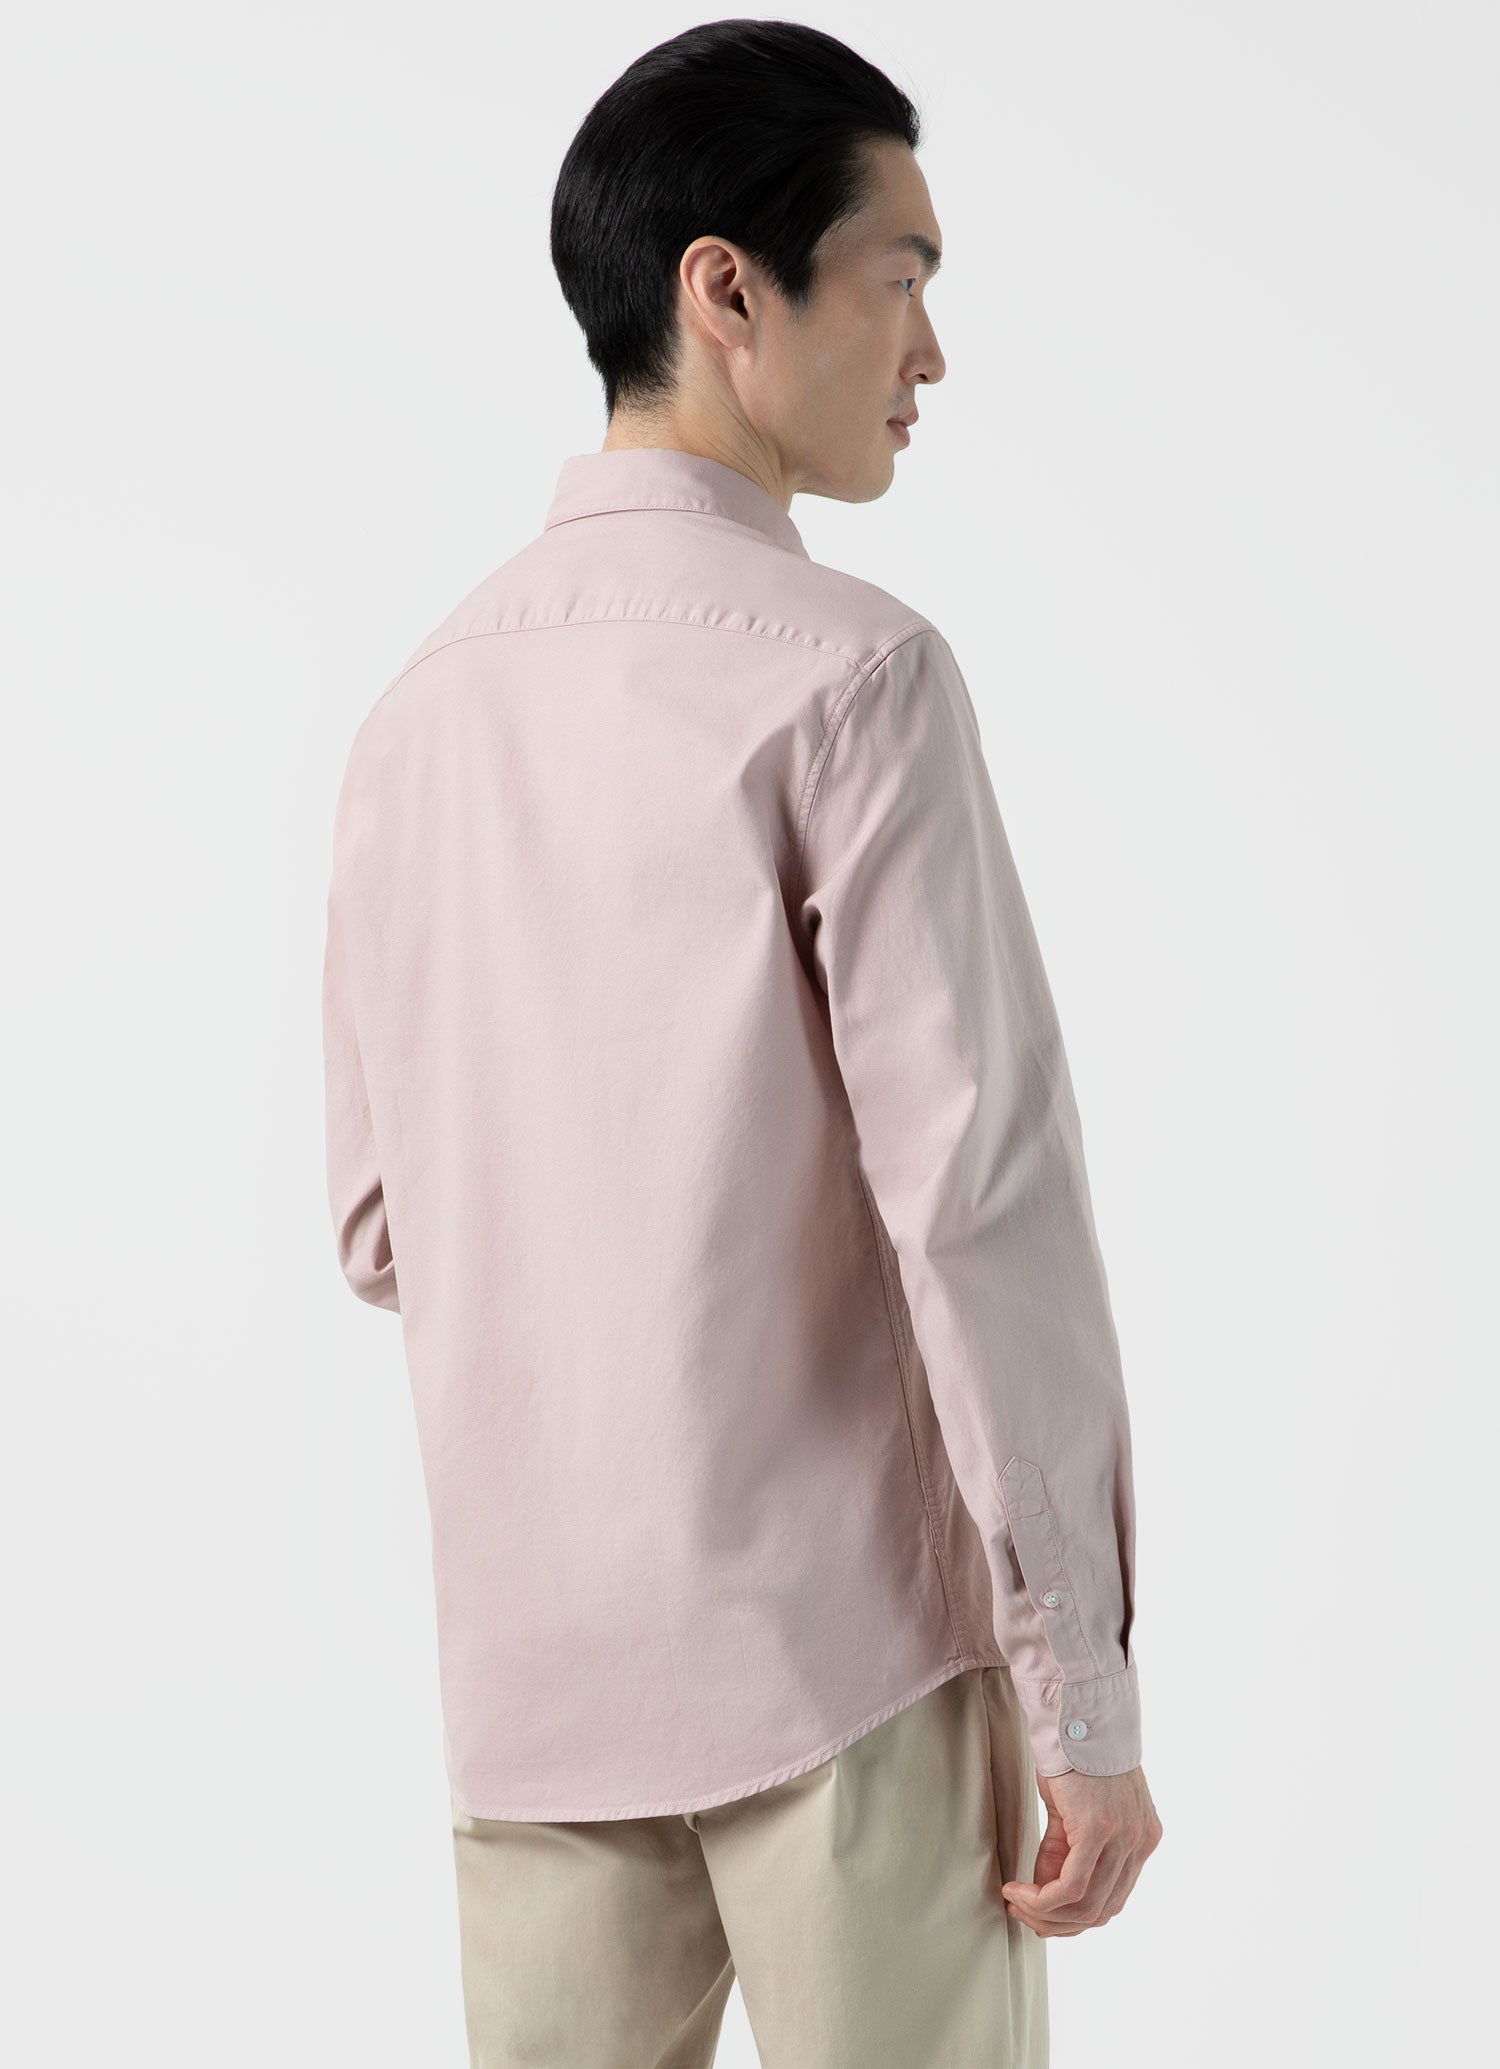 Men's Oxford Shirt in Pale Pink